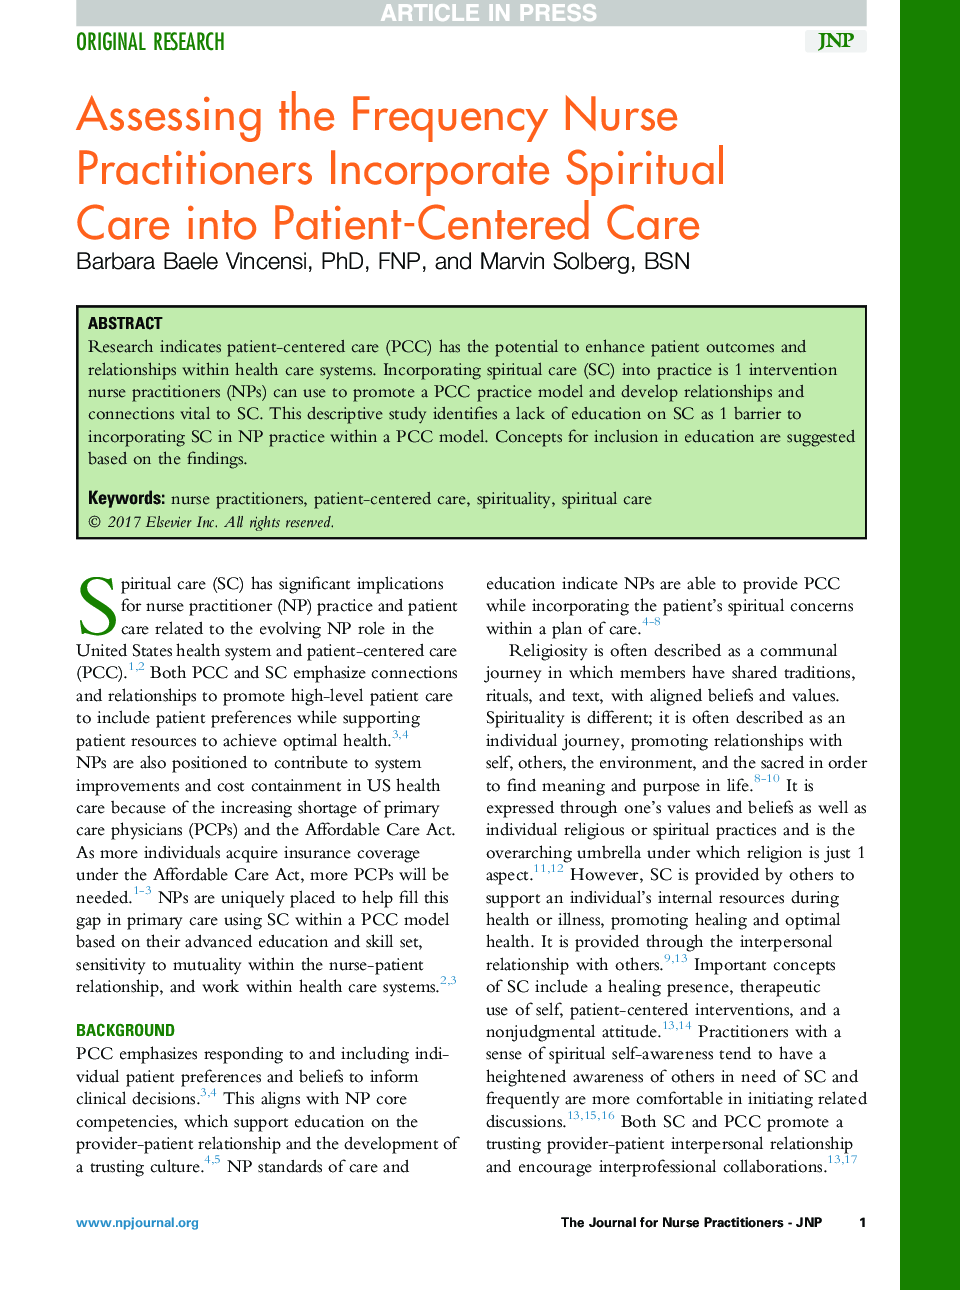 Assessing the Frequency Nurse Practitioners Incorporate Spiritual CareÂ into Patient-Centered Care